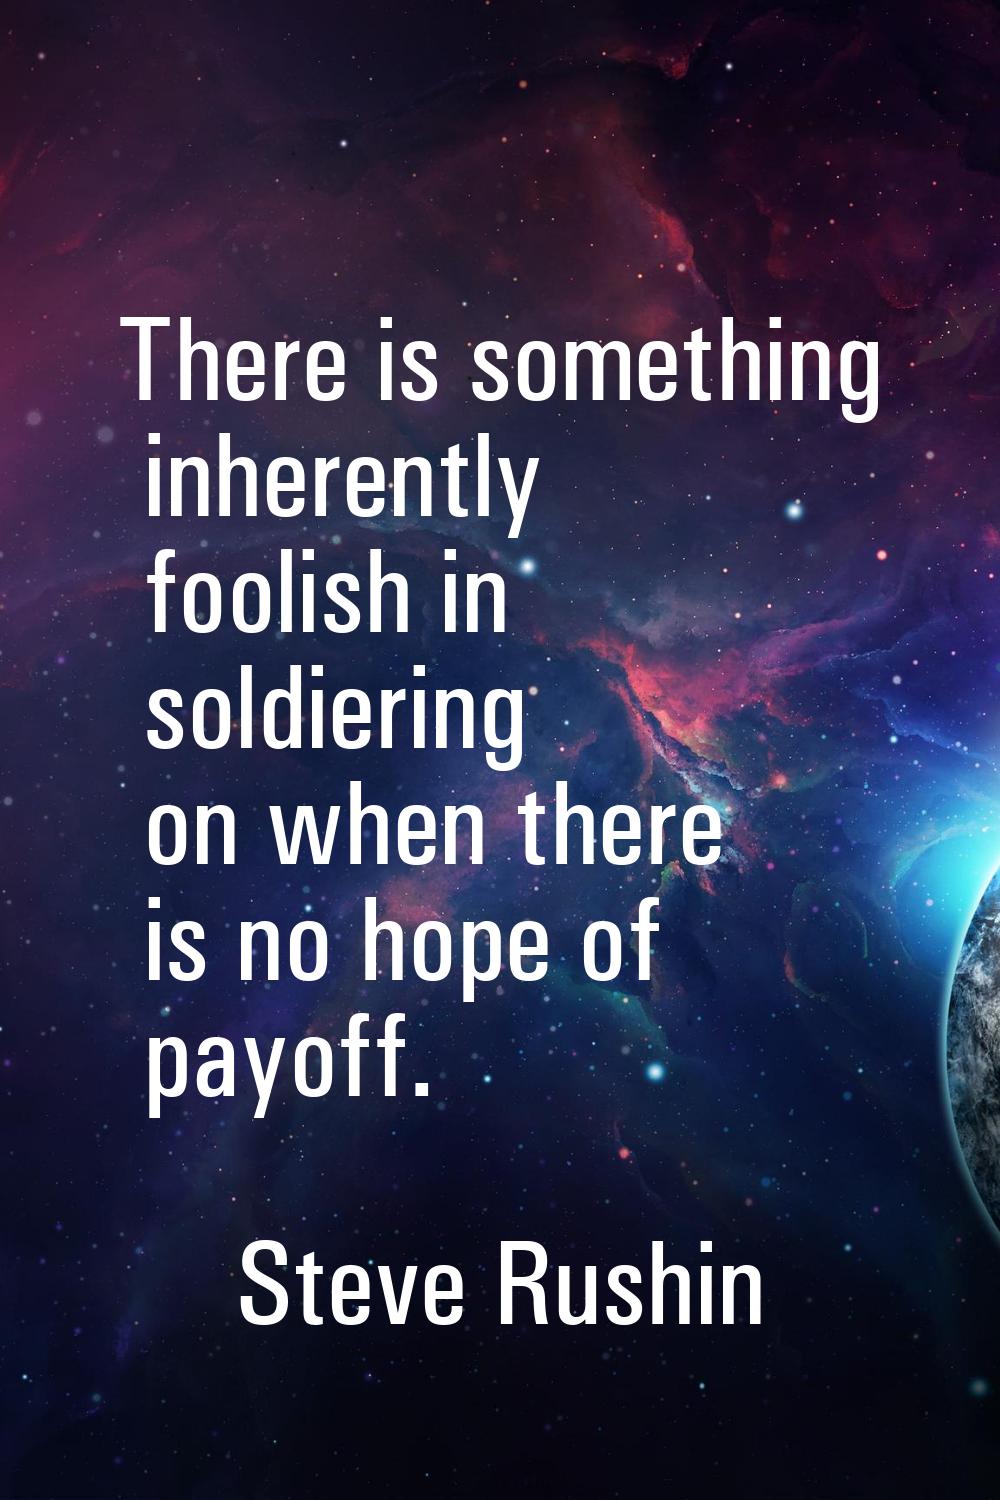 There is something inherently foolish in soldiering on when there is no hope of payoff.